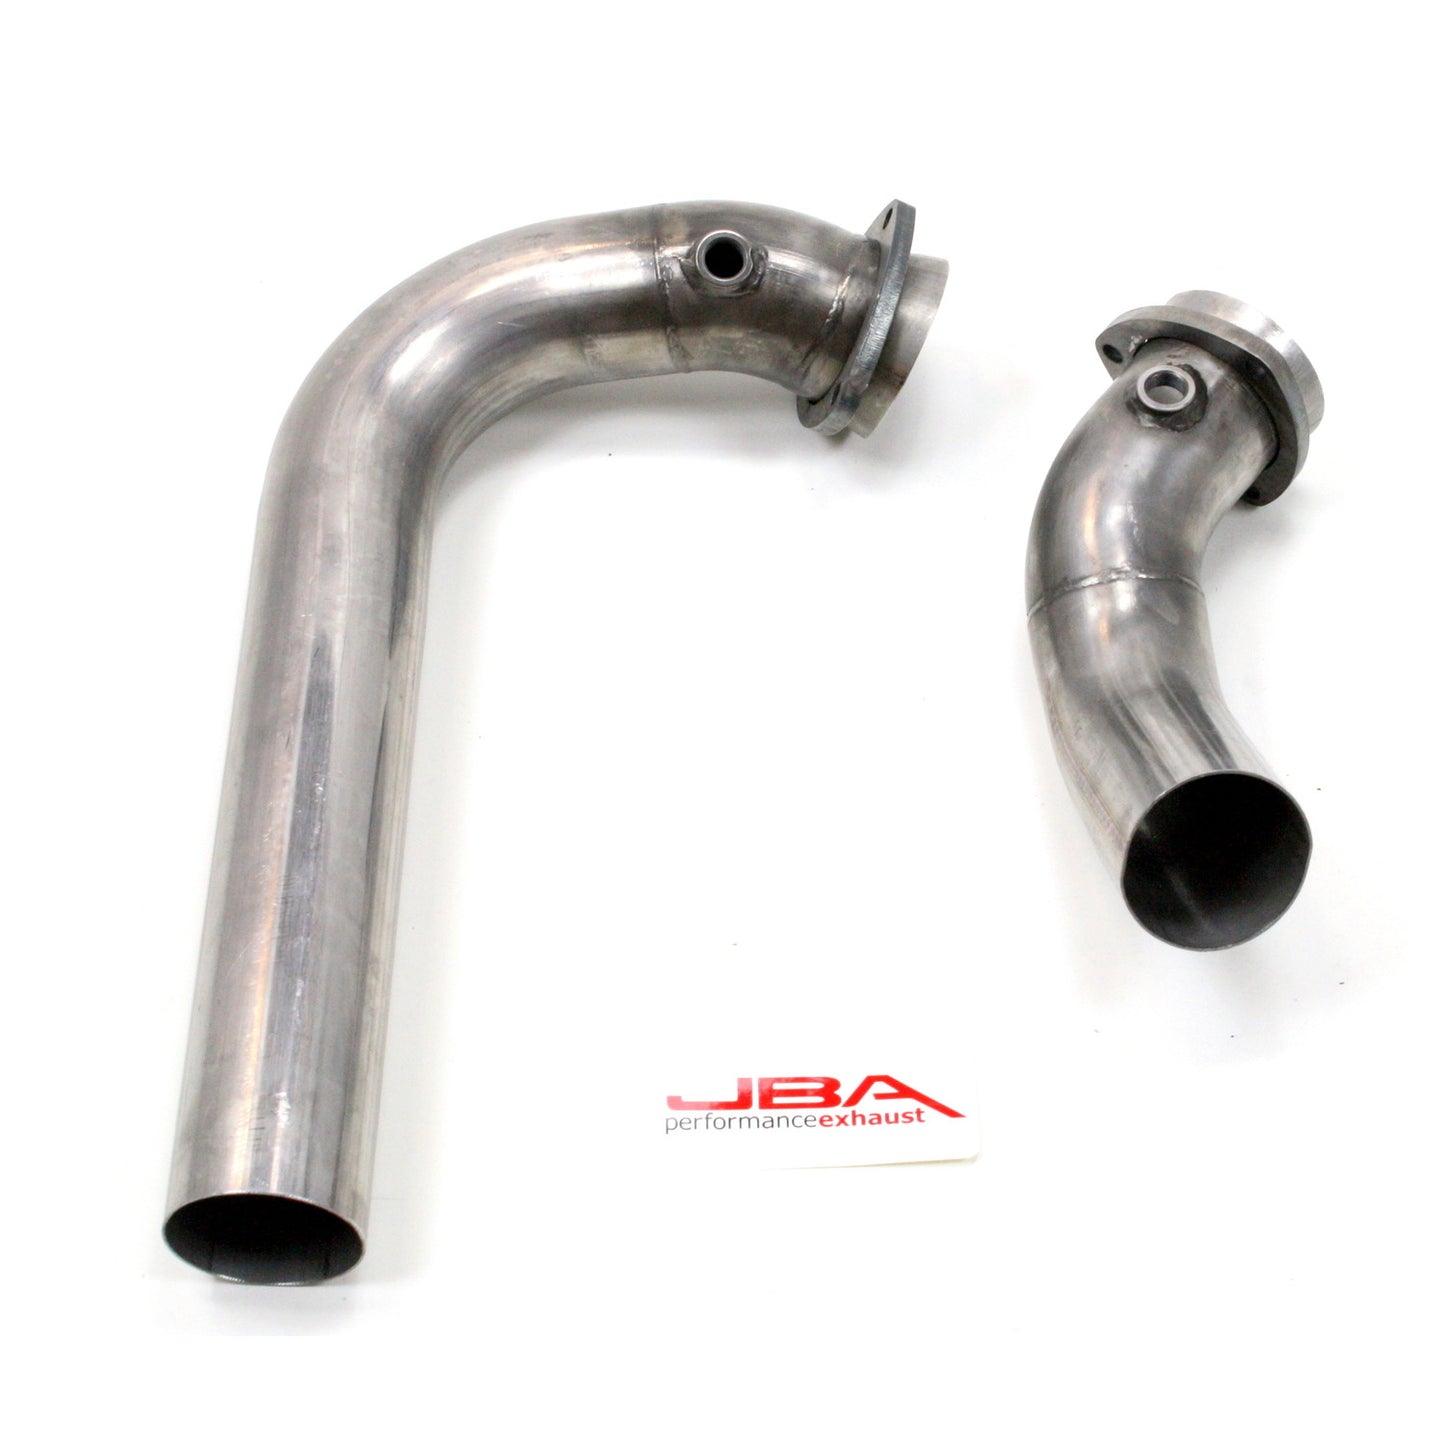 JBA Performance Exhaust 1822SY 3" Stainless Steel Mid-Pipe Down Pipe for 1822, 1823